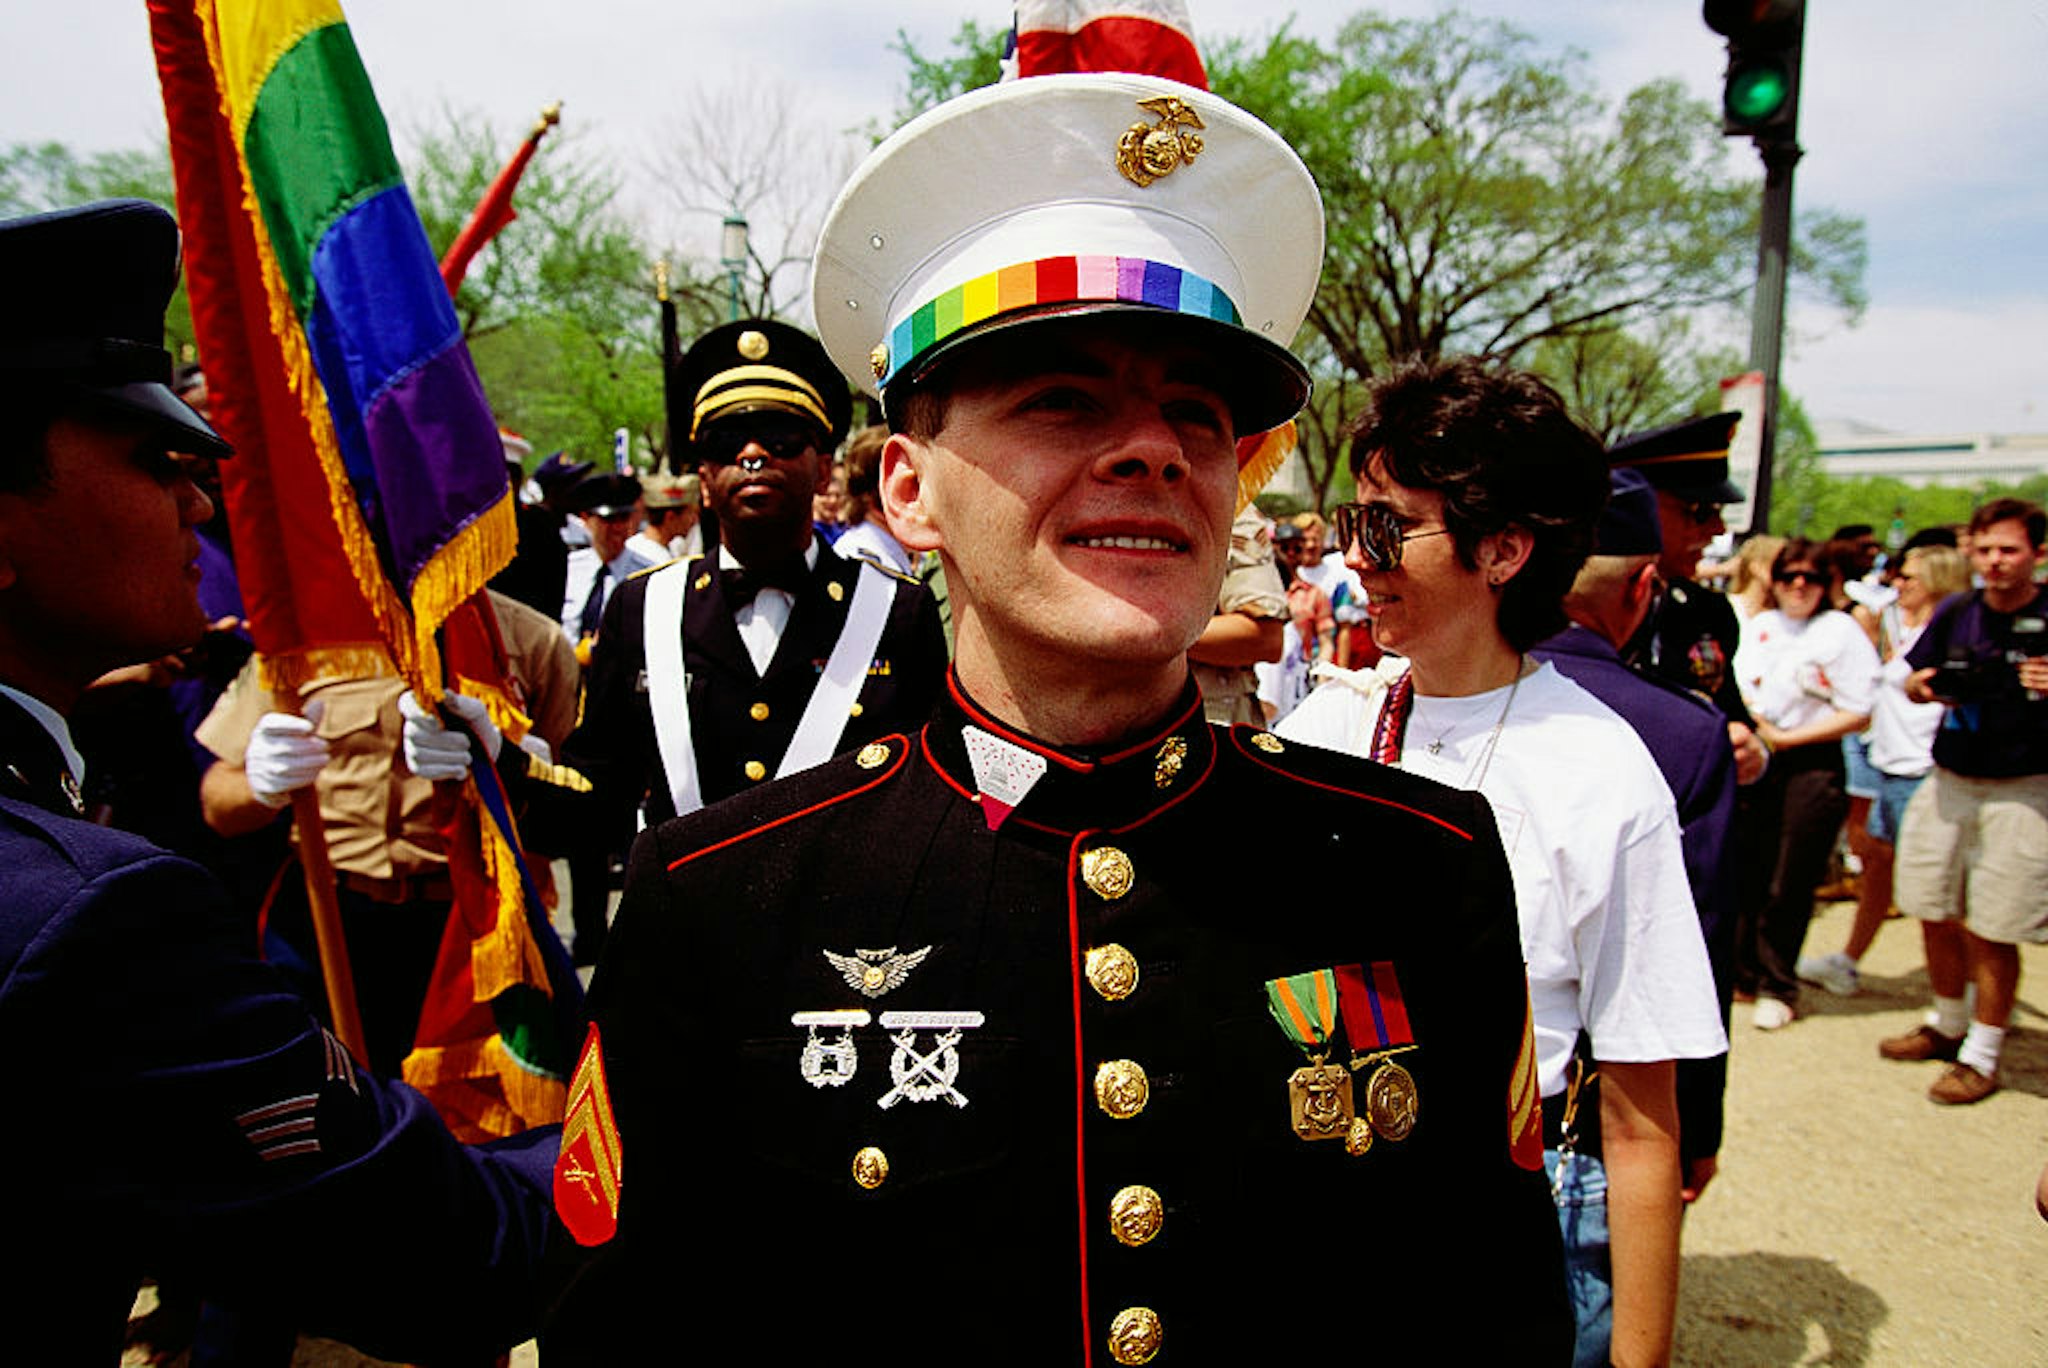 Gay marine standing with other participants at the 1993 March on Washington for Lesbian, Gay, and Bisexual Rights and Liberation. (Photo by © Shepard Sherbell/CORBIS SABA/Corbis via Getty Images)